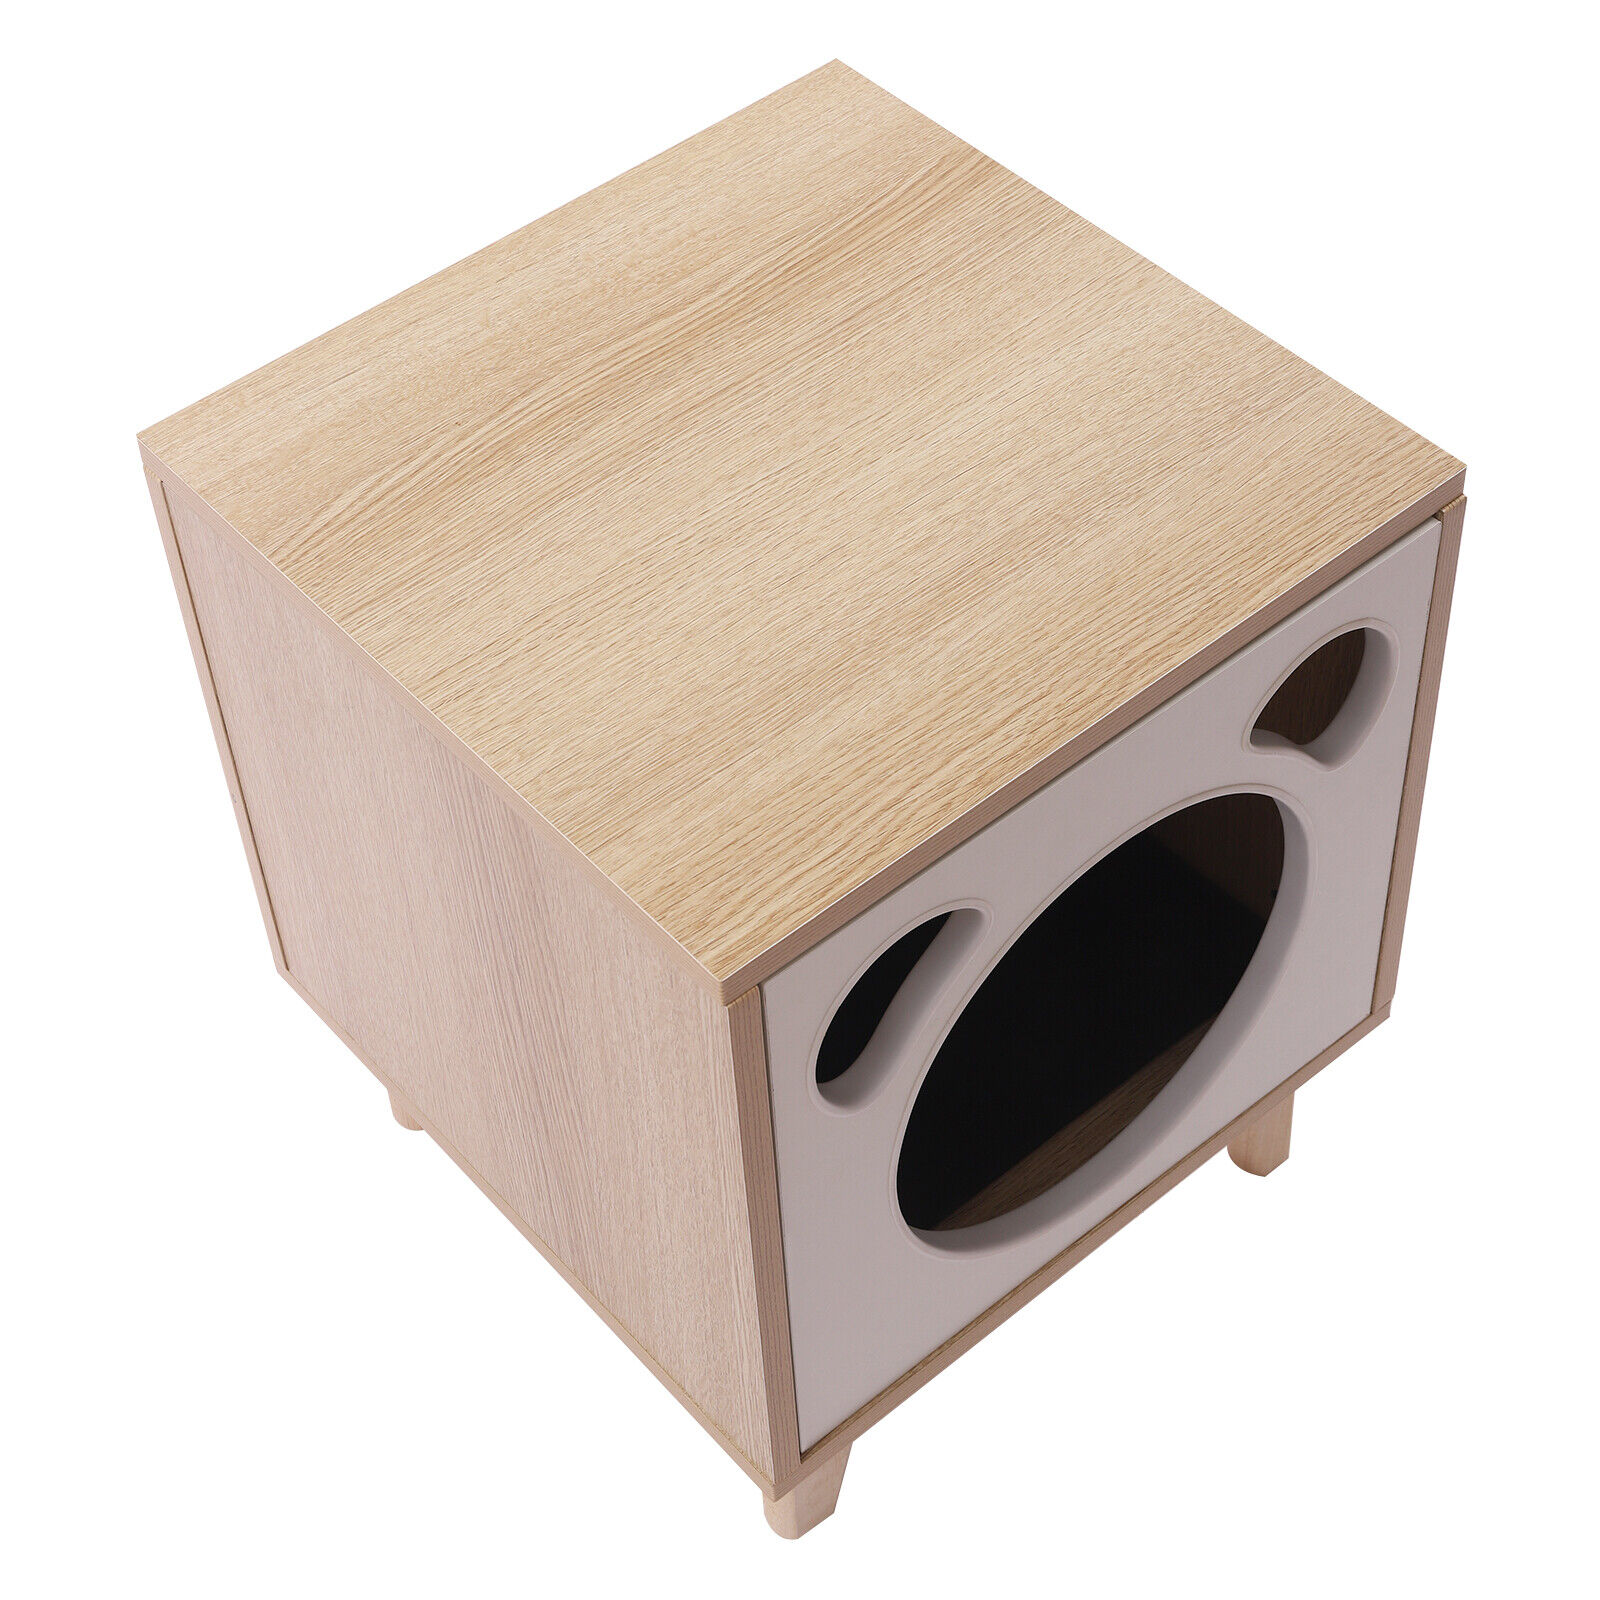 Wooden Nightstand Cat Bed Storage End Table Enclosure Bedside Organizer Modern Unbranded Does not apply - фотография #7